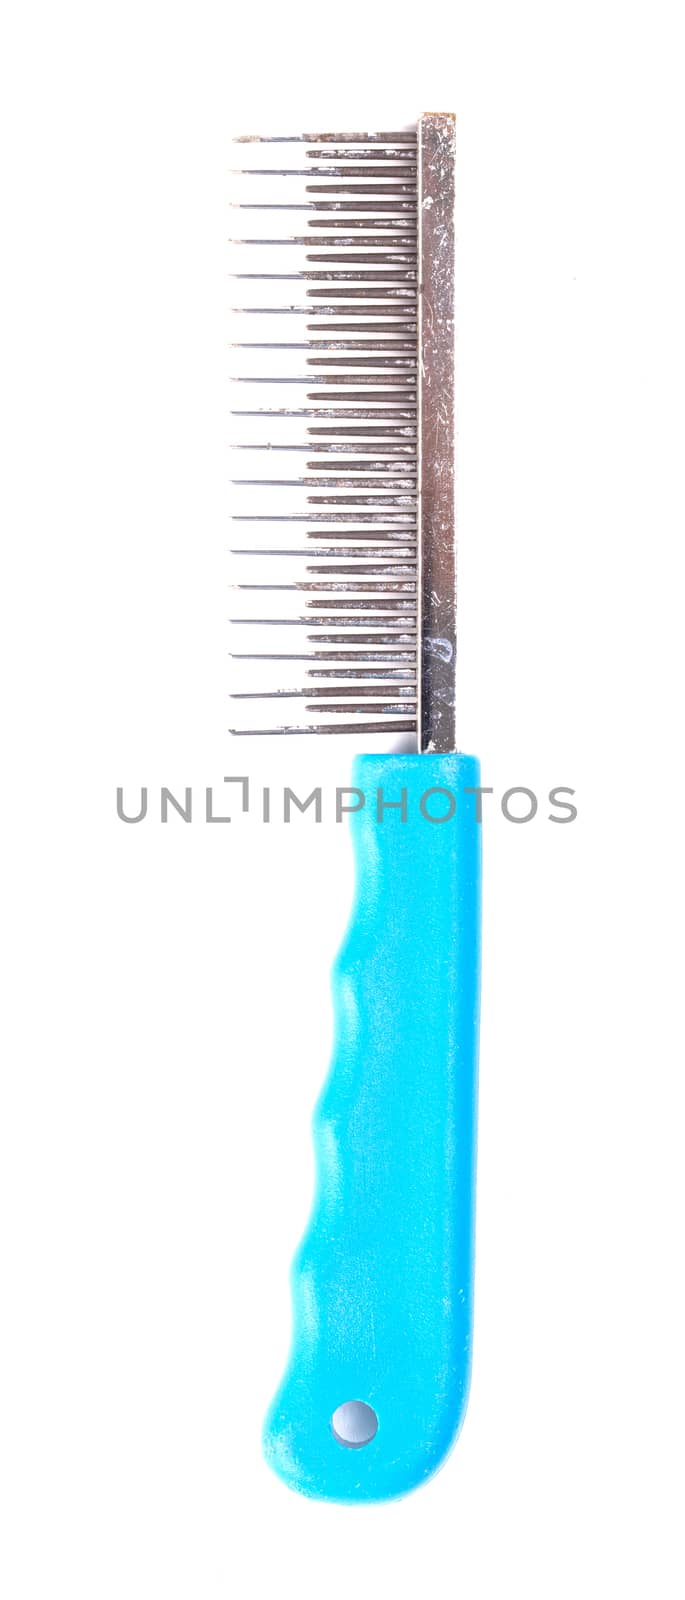 Comb with blue handle for animals with long hair, isolated